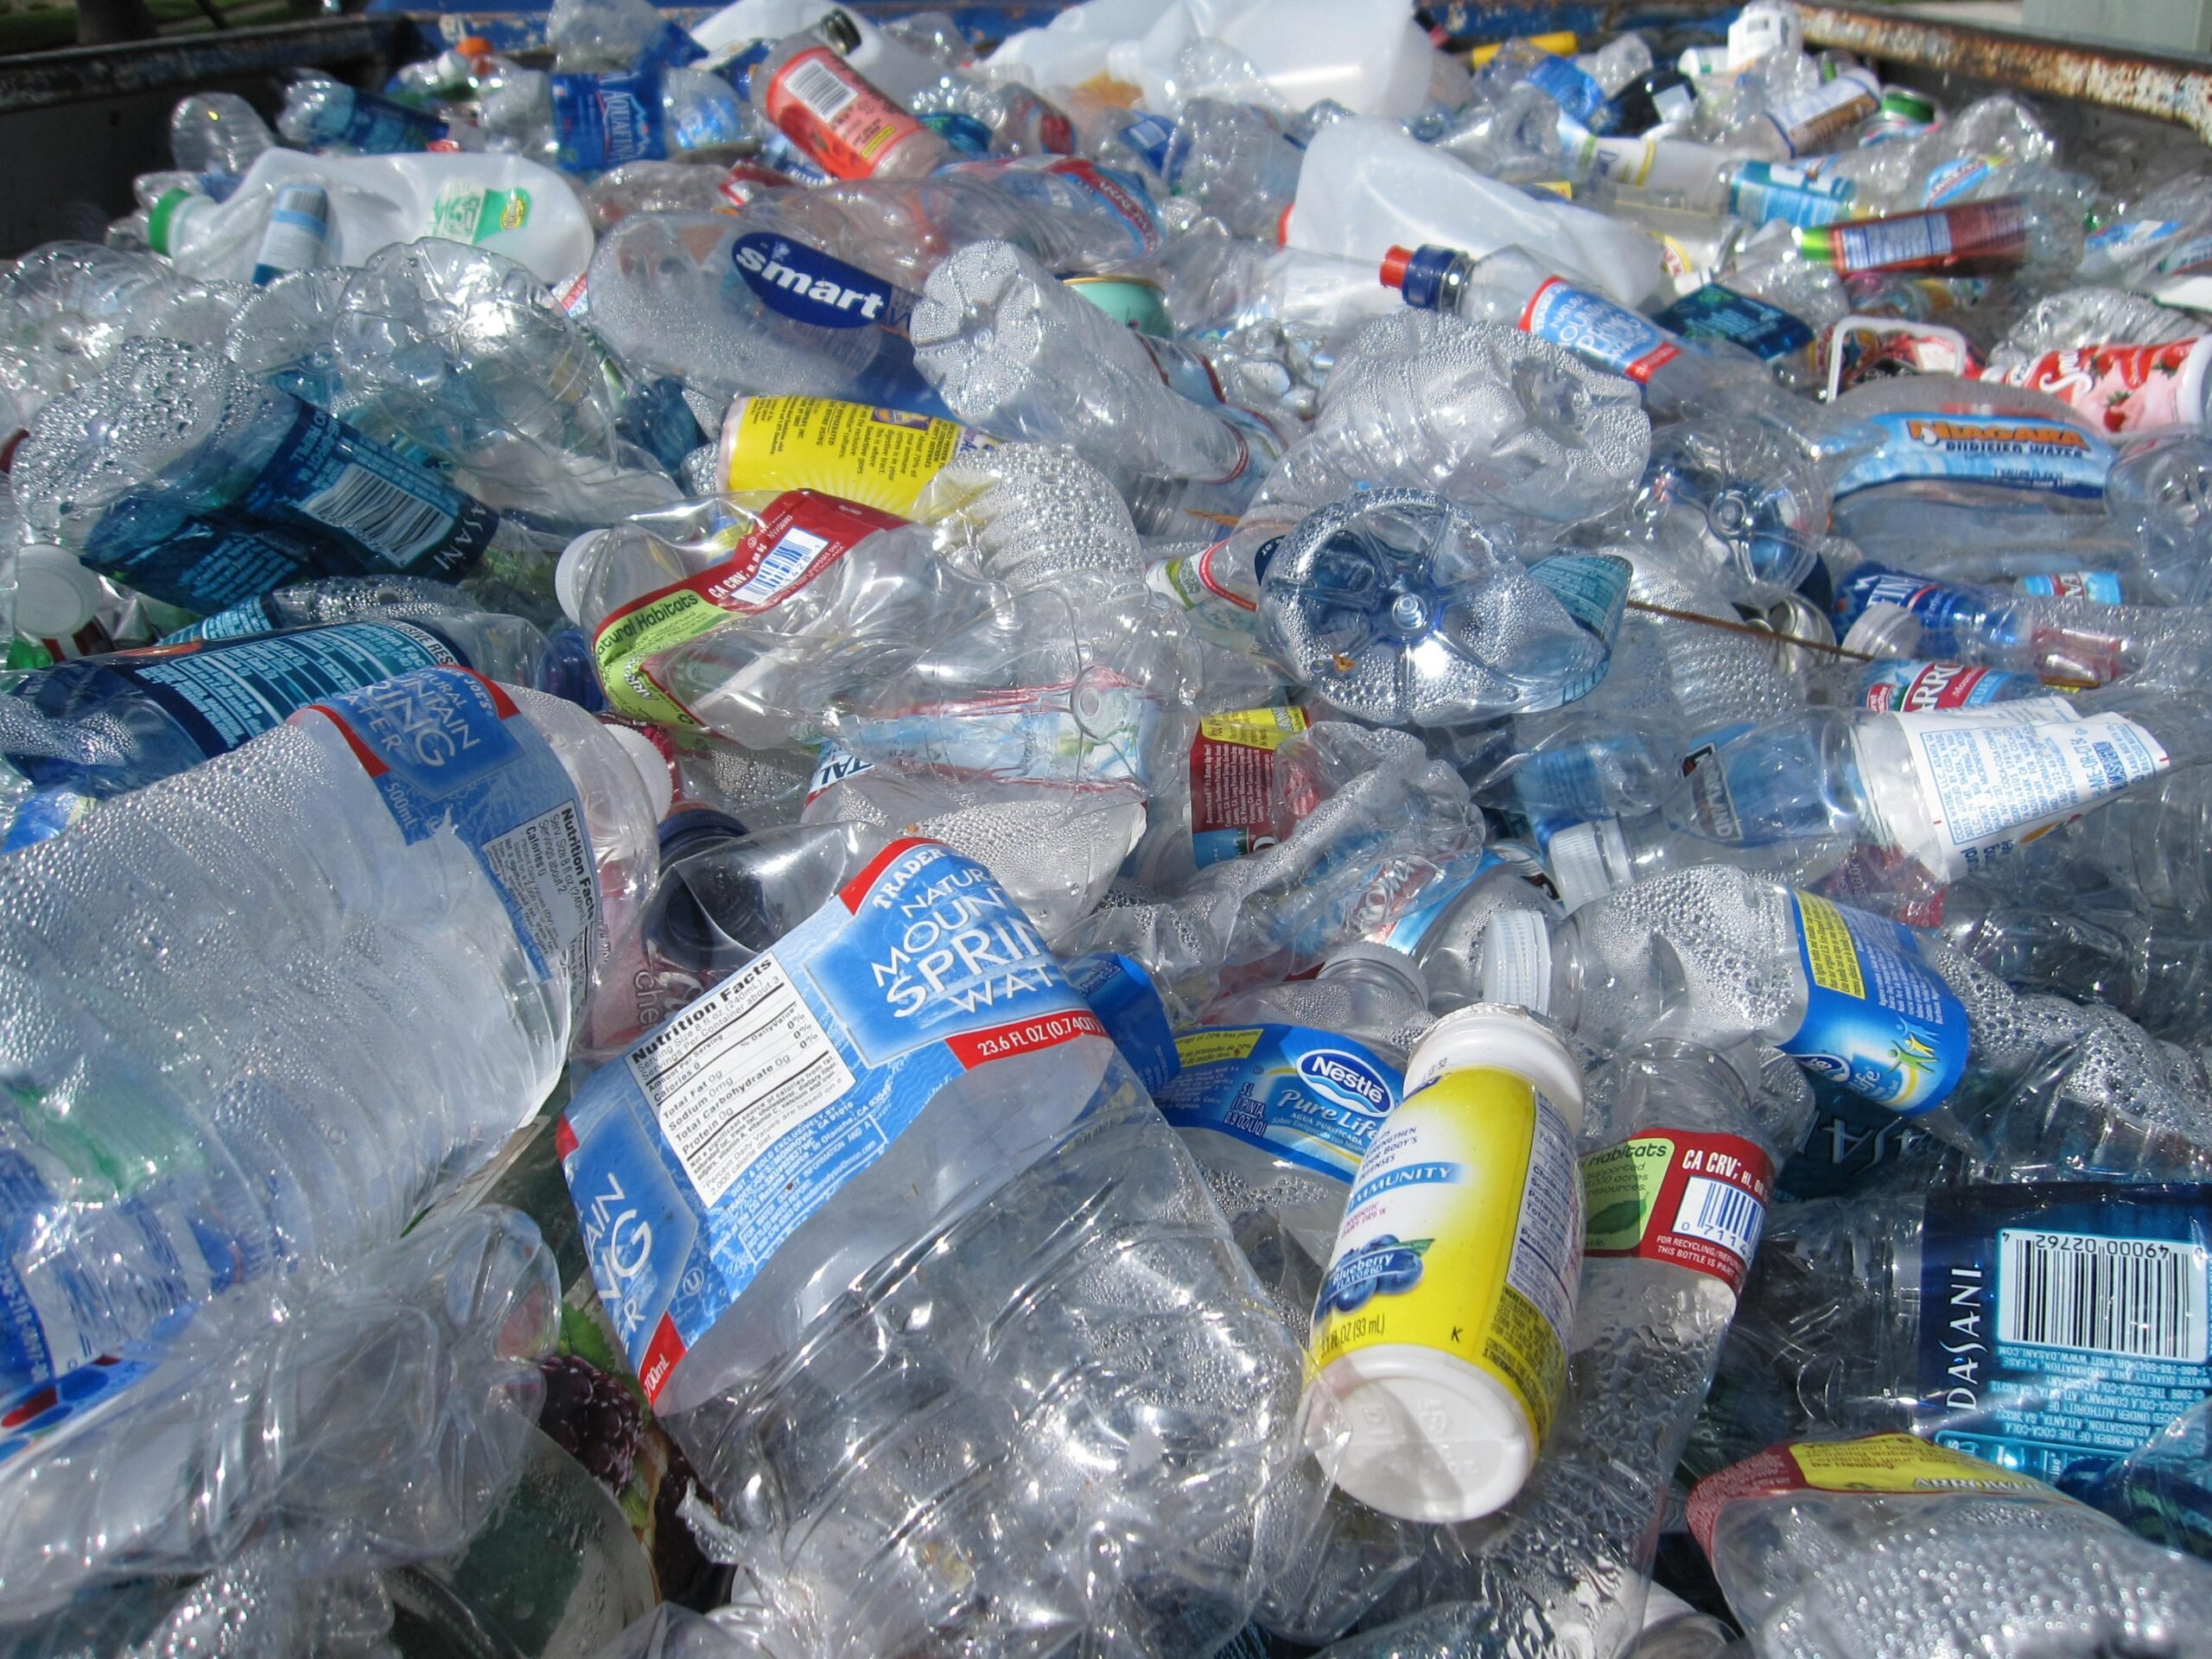 Living with plastic: thermo-chemical recycling can change the way we view waste